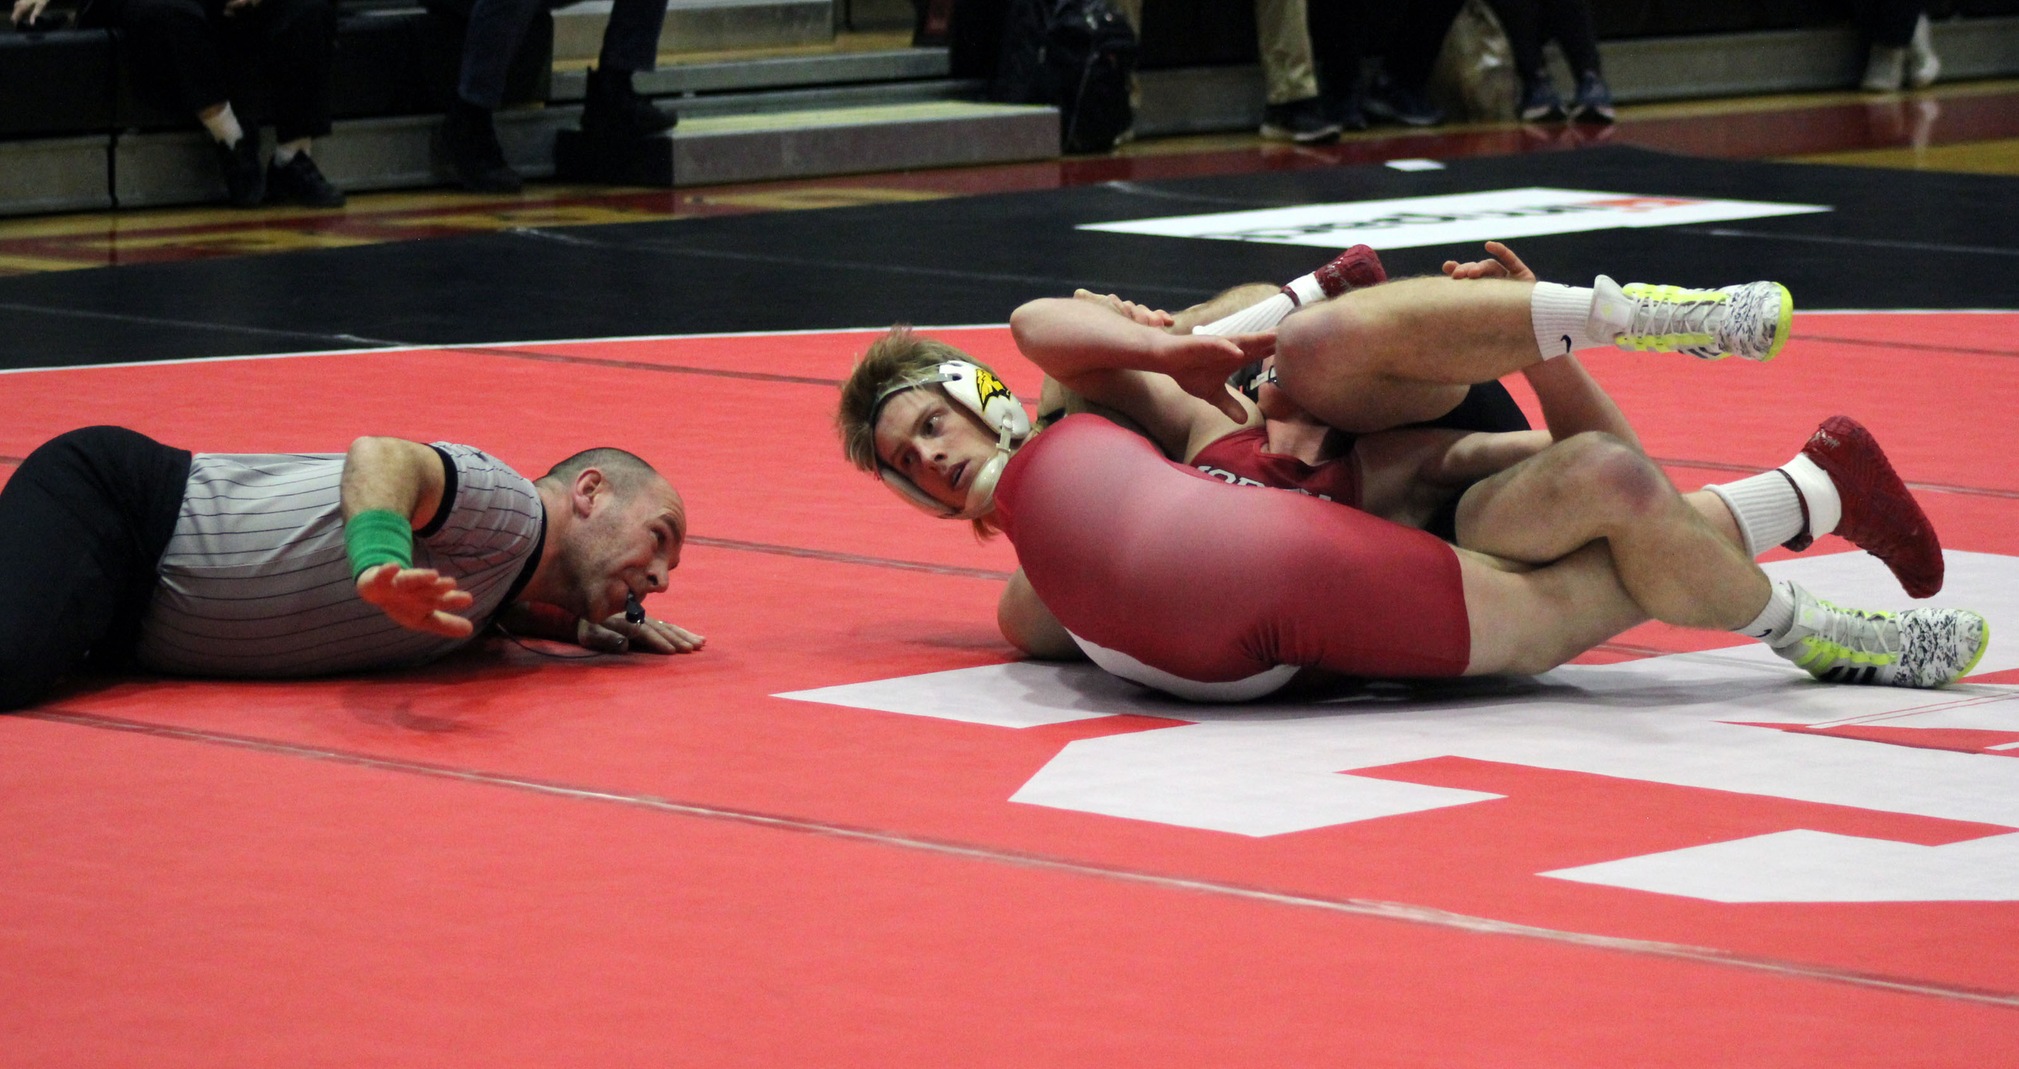 It took just 16 seconds for UW-Oshkosh's Jordan Blanchard to pin North Central College's Brock Montford.